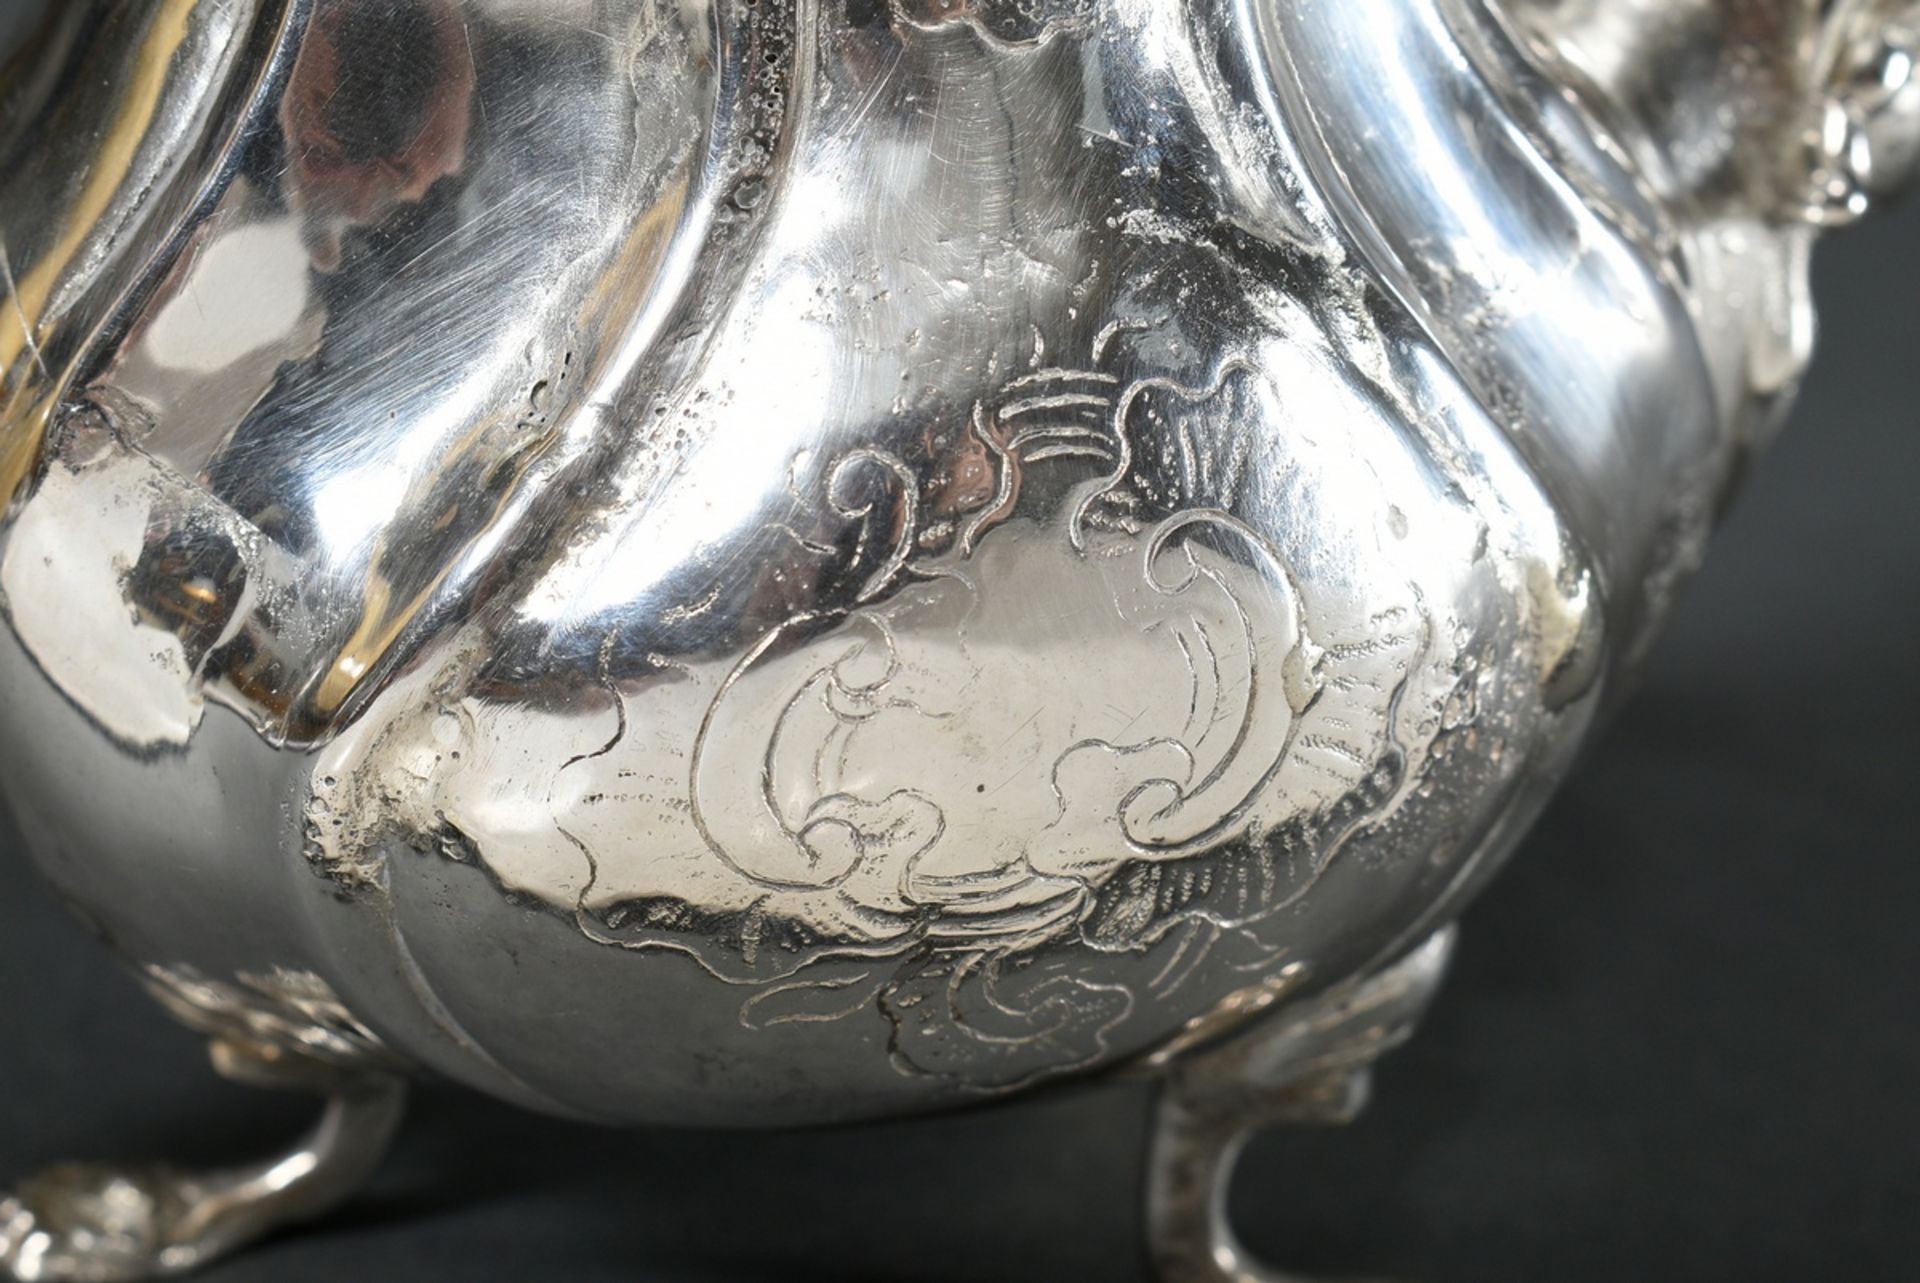 Small Danish mocha pot on three feet with curved features, floral engraved wall, sculptural eagle p - Image 4 of 9